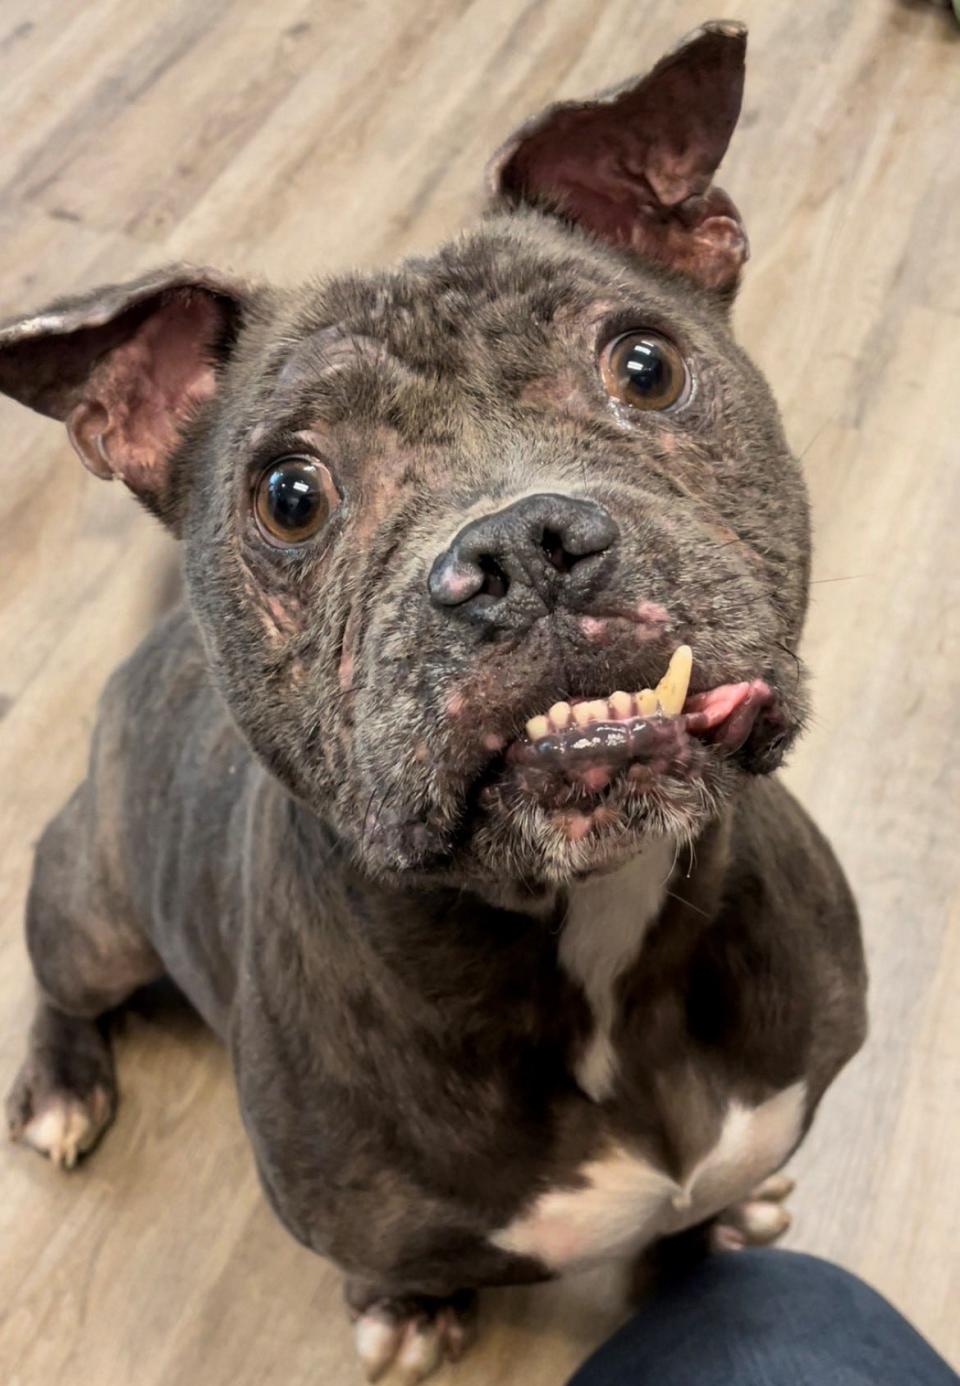 Big Daddy is a 4-year-old bundle of joy and affection. His favorite pastimes include fetching tennis balls, trying to sit in your lap and doing anything for a treat. This guy does well with calmer dogs his size or larger.